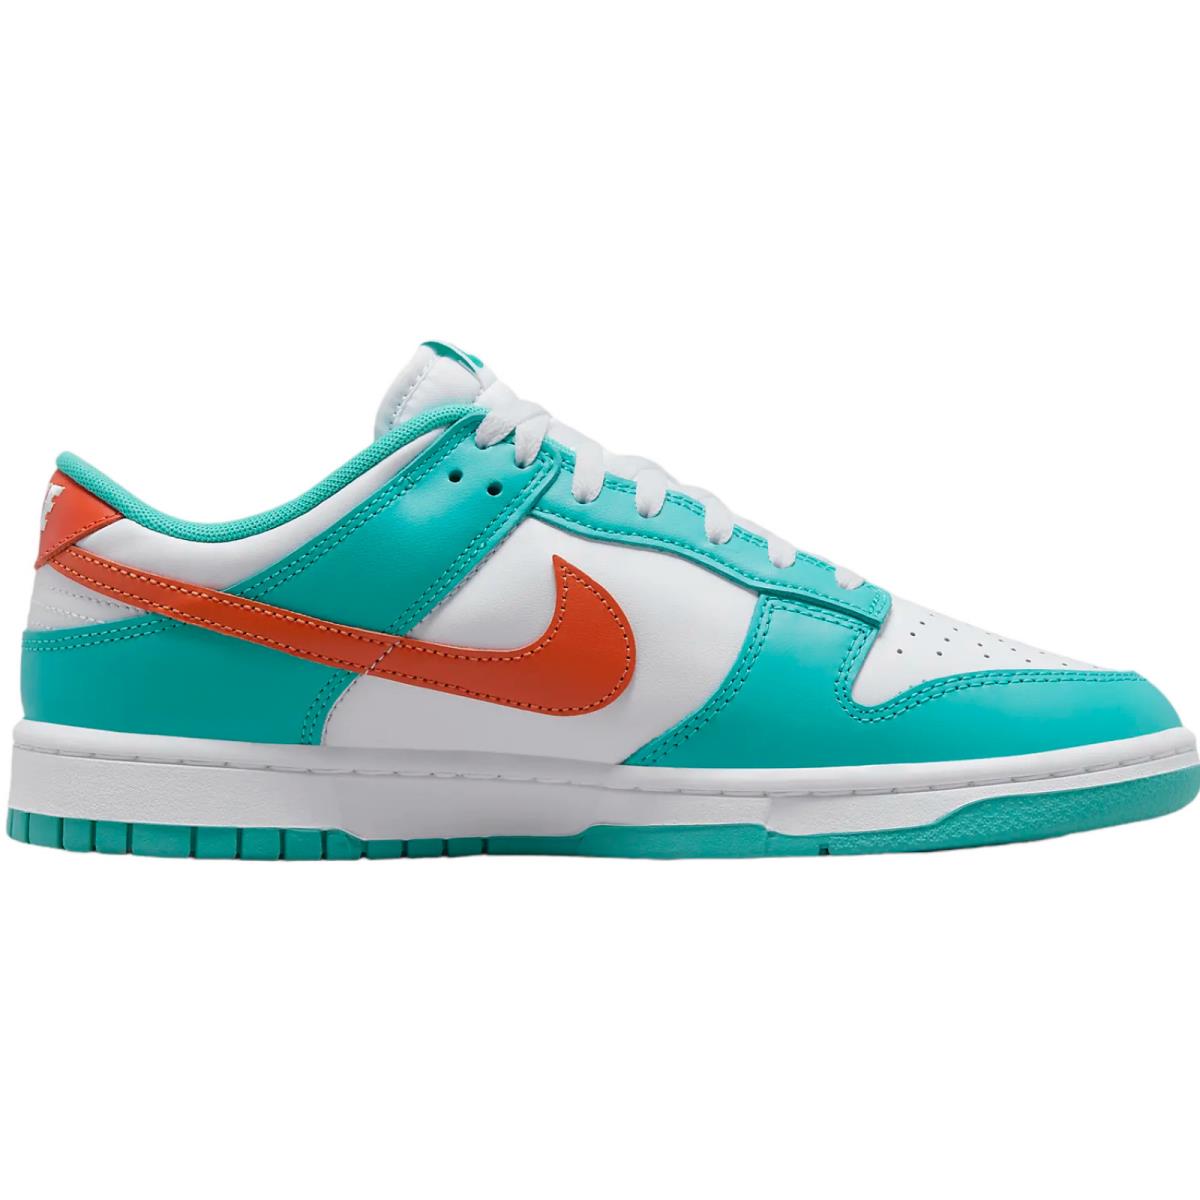 Nike Dunk Low Retro Men`s Casual Shoes All Colors US Sizes 7-14 White/Dusty Cactus/Cosmic Clay